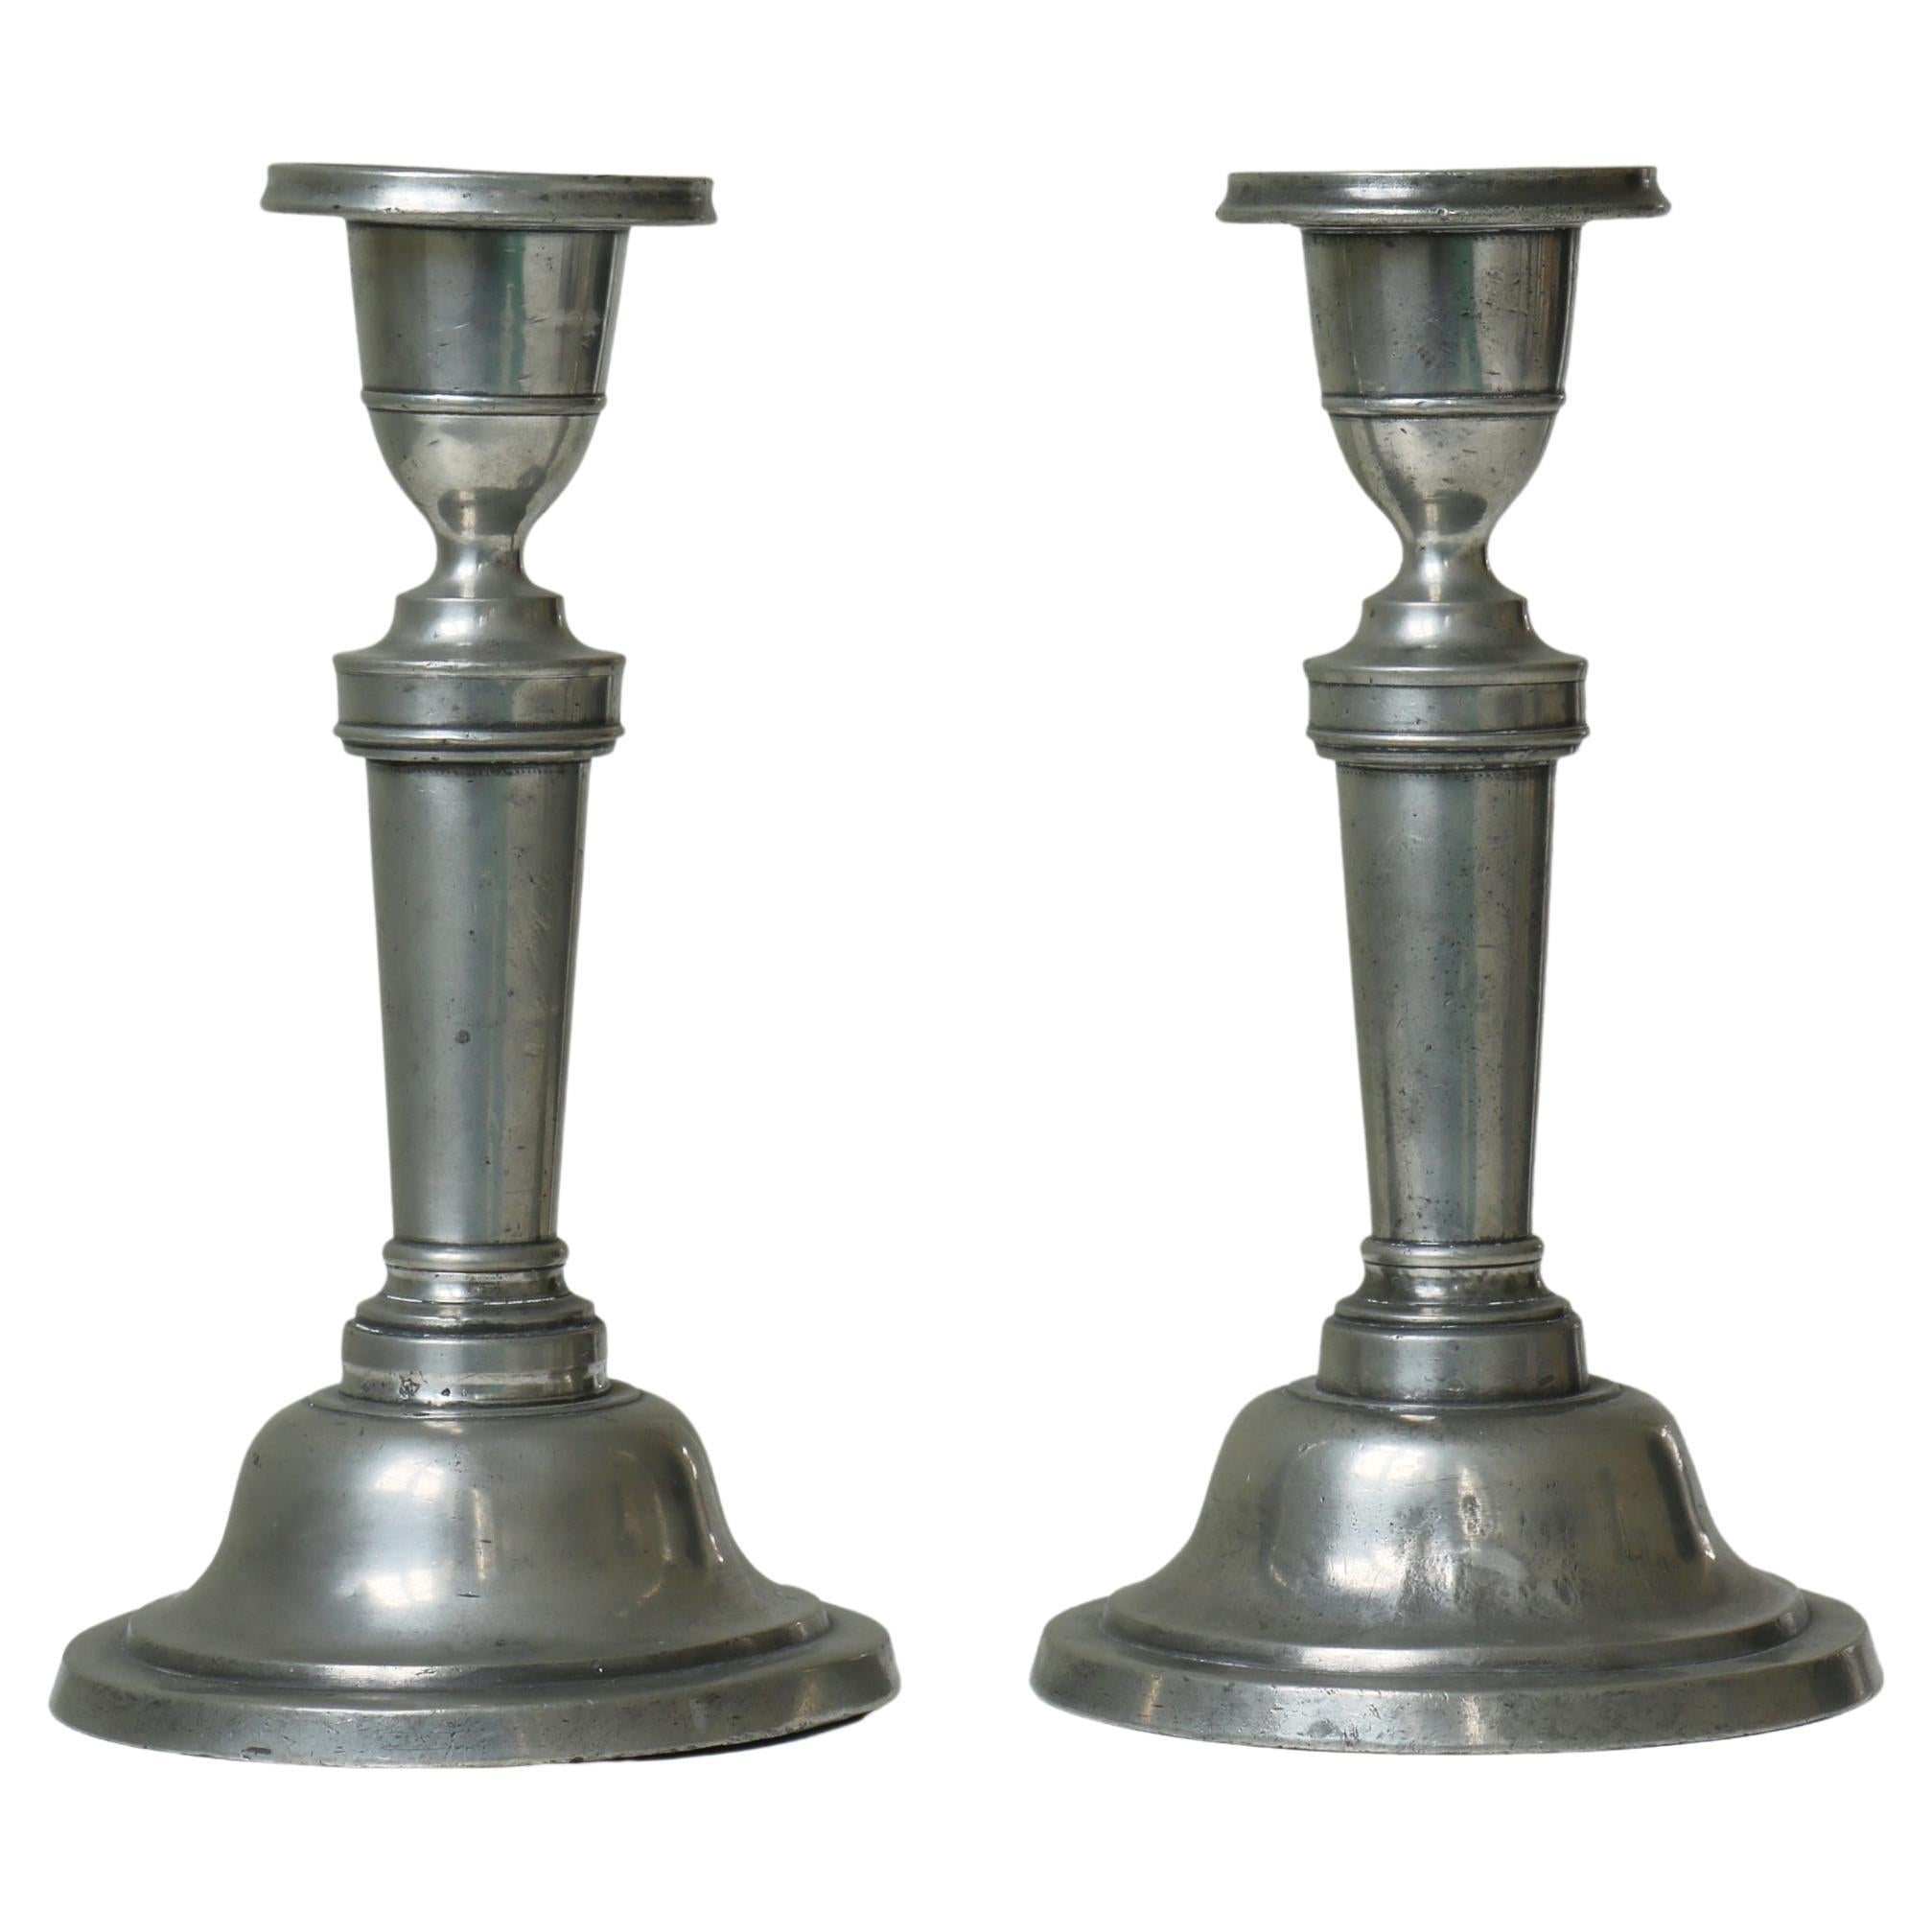 Handmade Antique Empire Candle Holders in Pewter, Stamped, Denmark, 19th Century